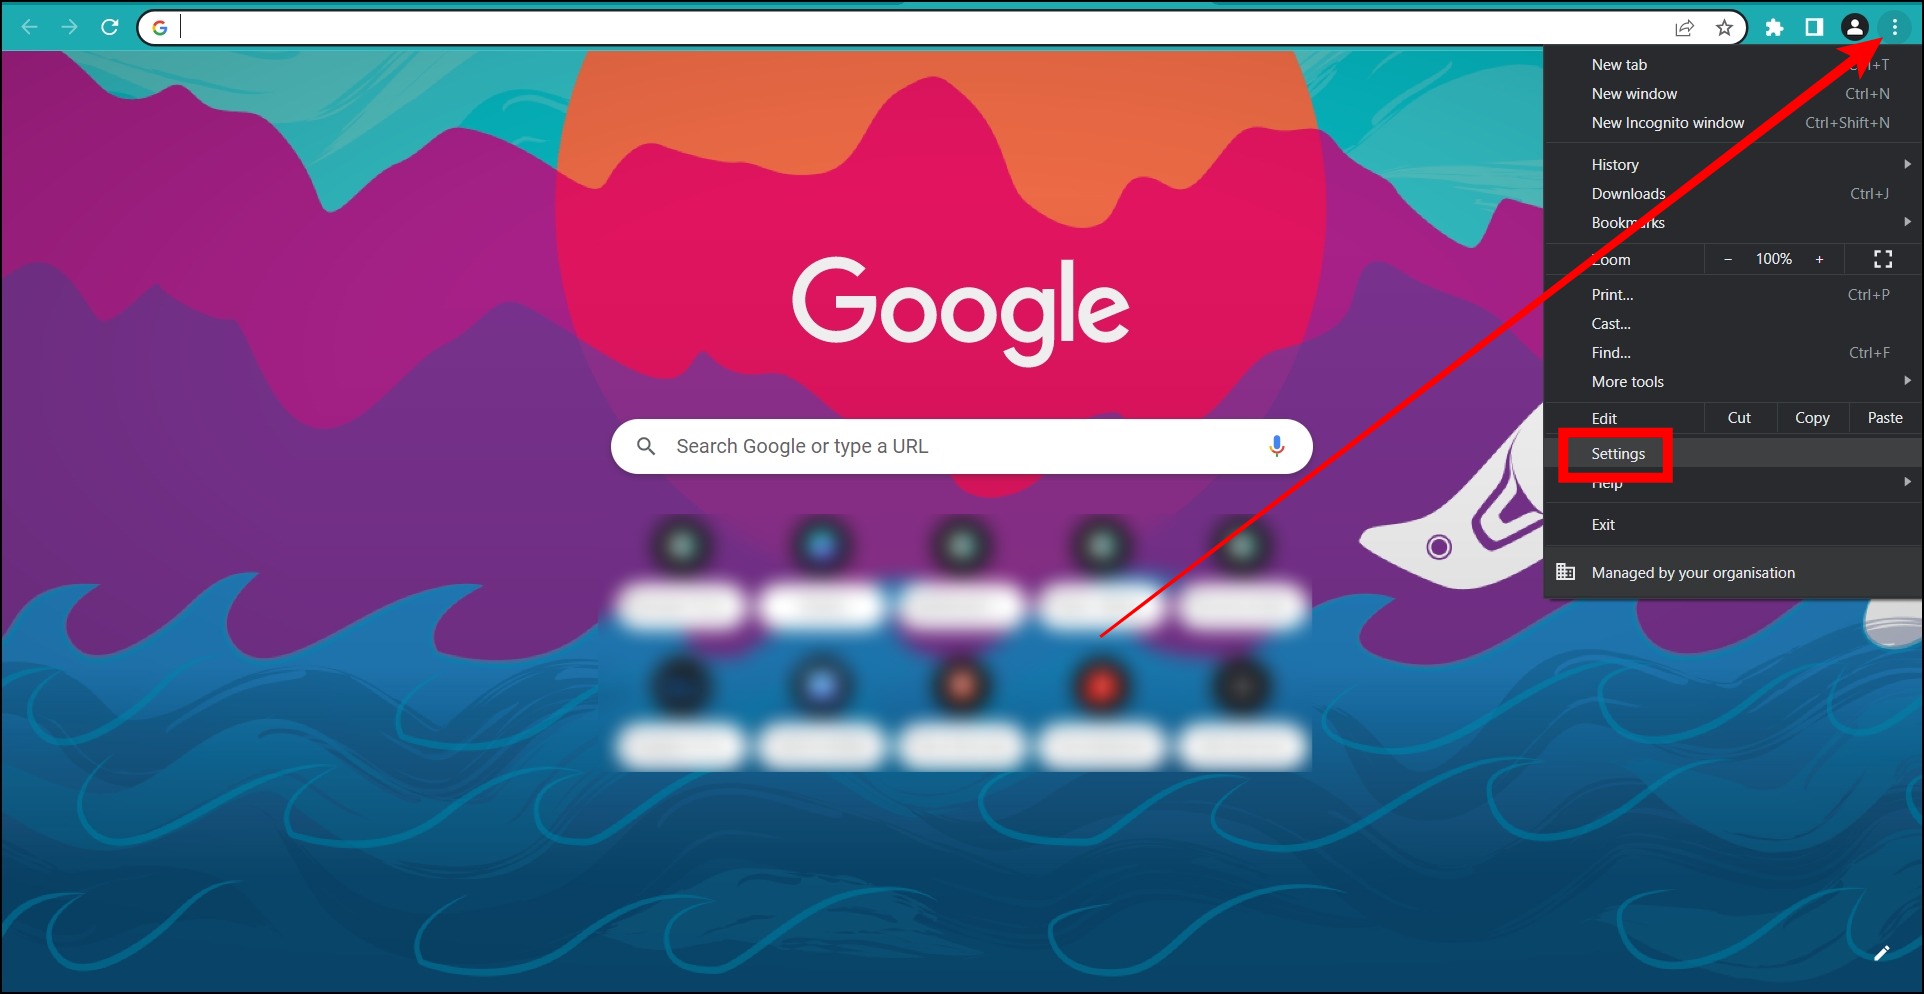 Revert or Switch to the Default Chrome Theme